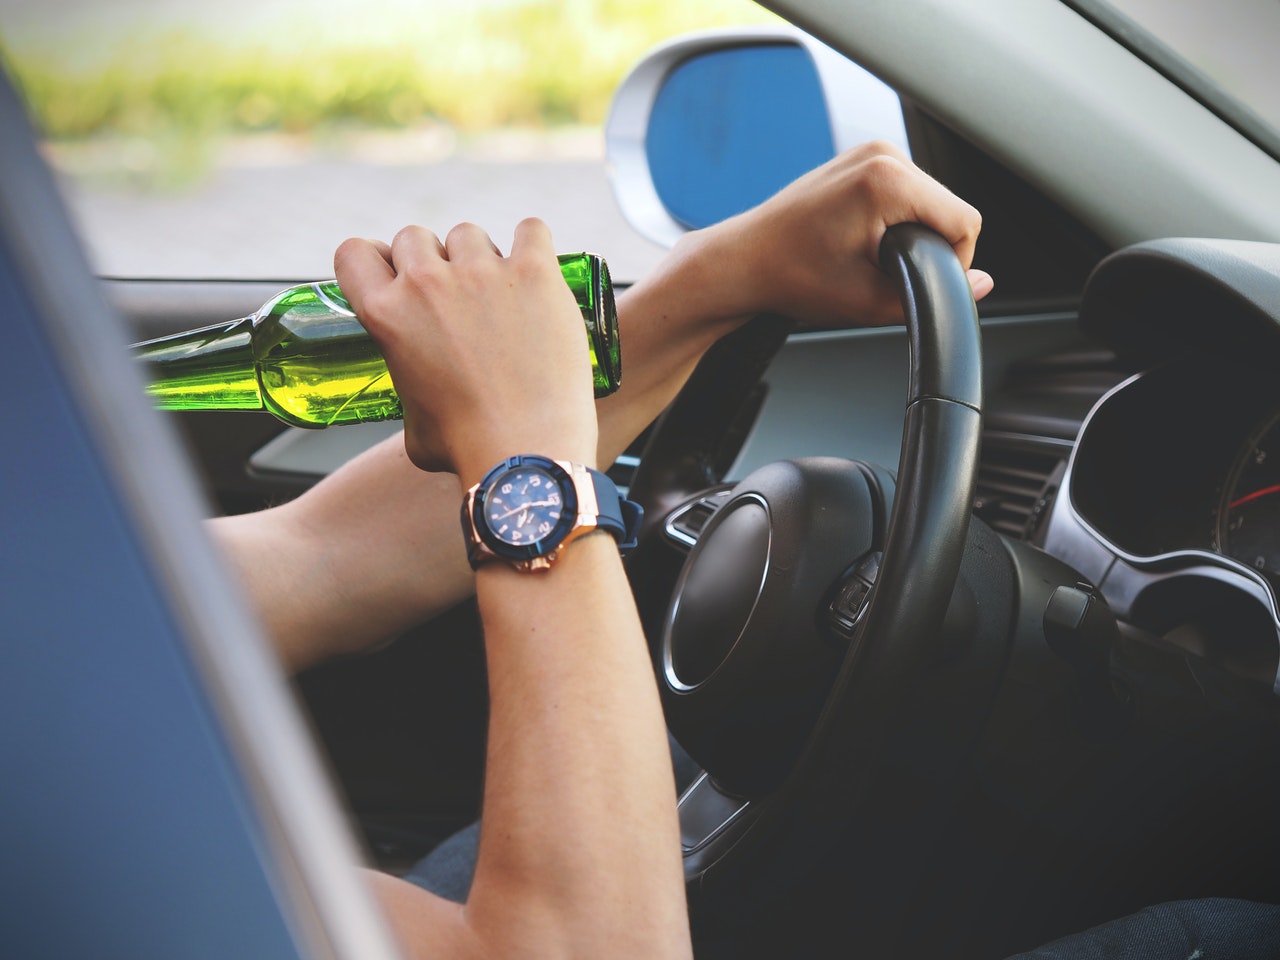 Alcohol Detection Systems Safety Standard in New Vehicles